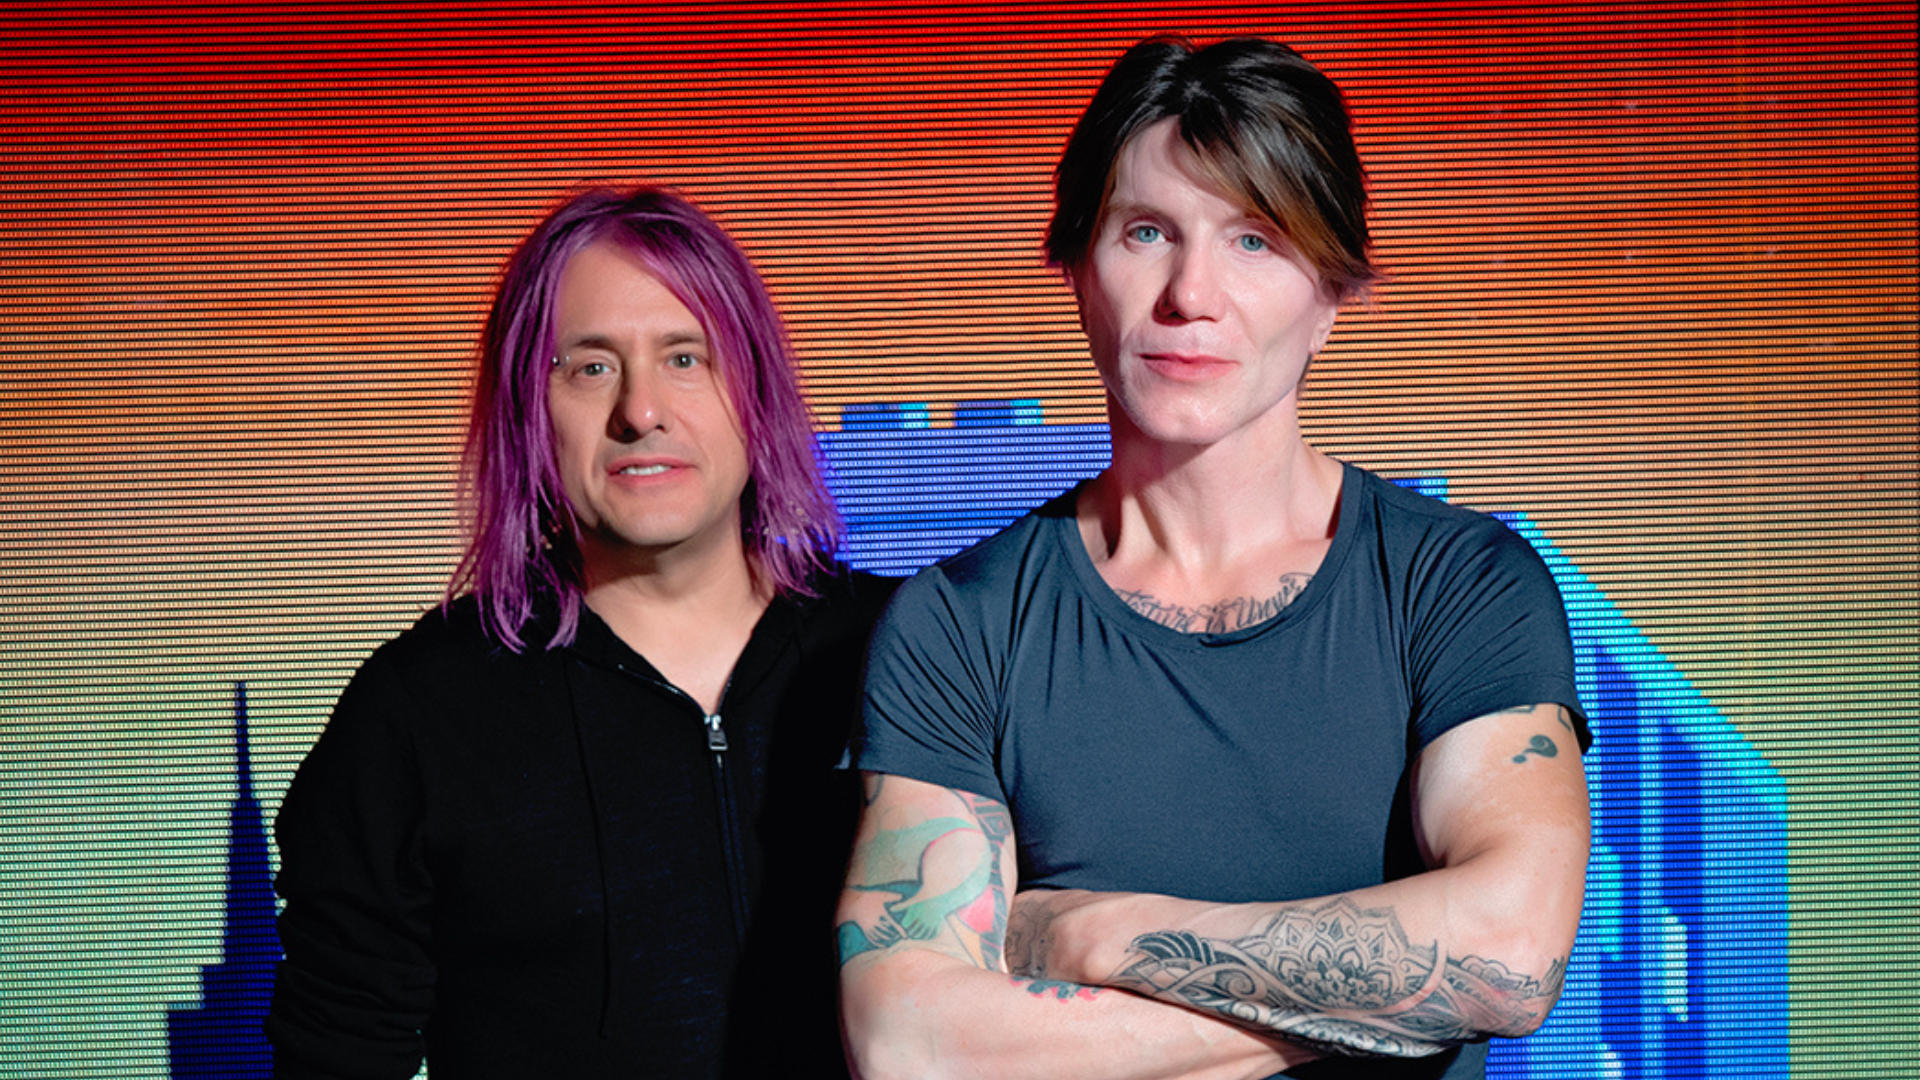 Tickets on sale for The Goo Goo Dolls at the National Cherry Festival 